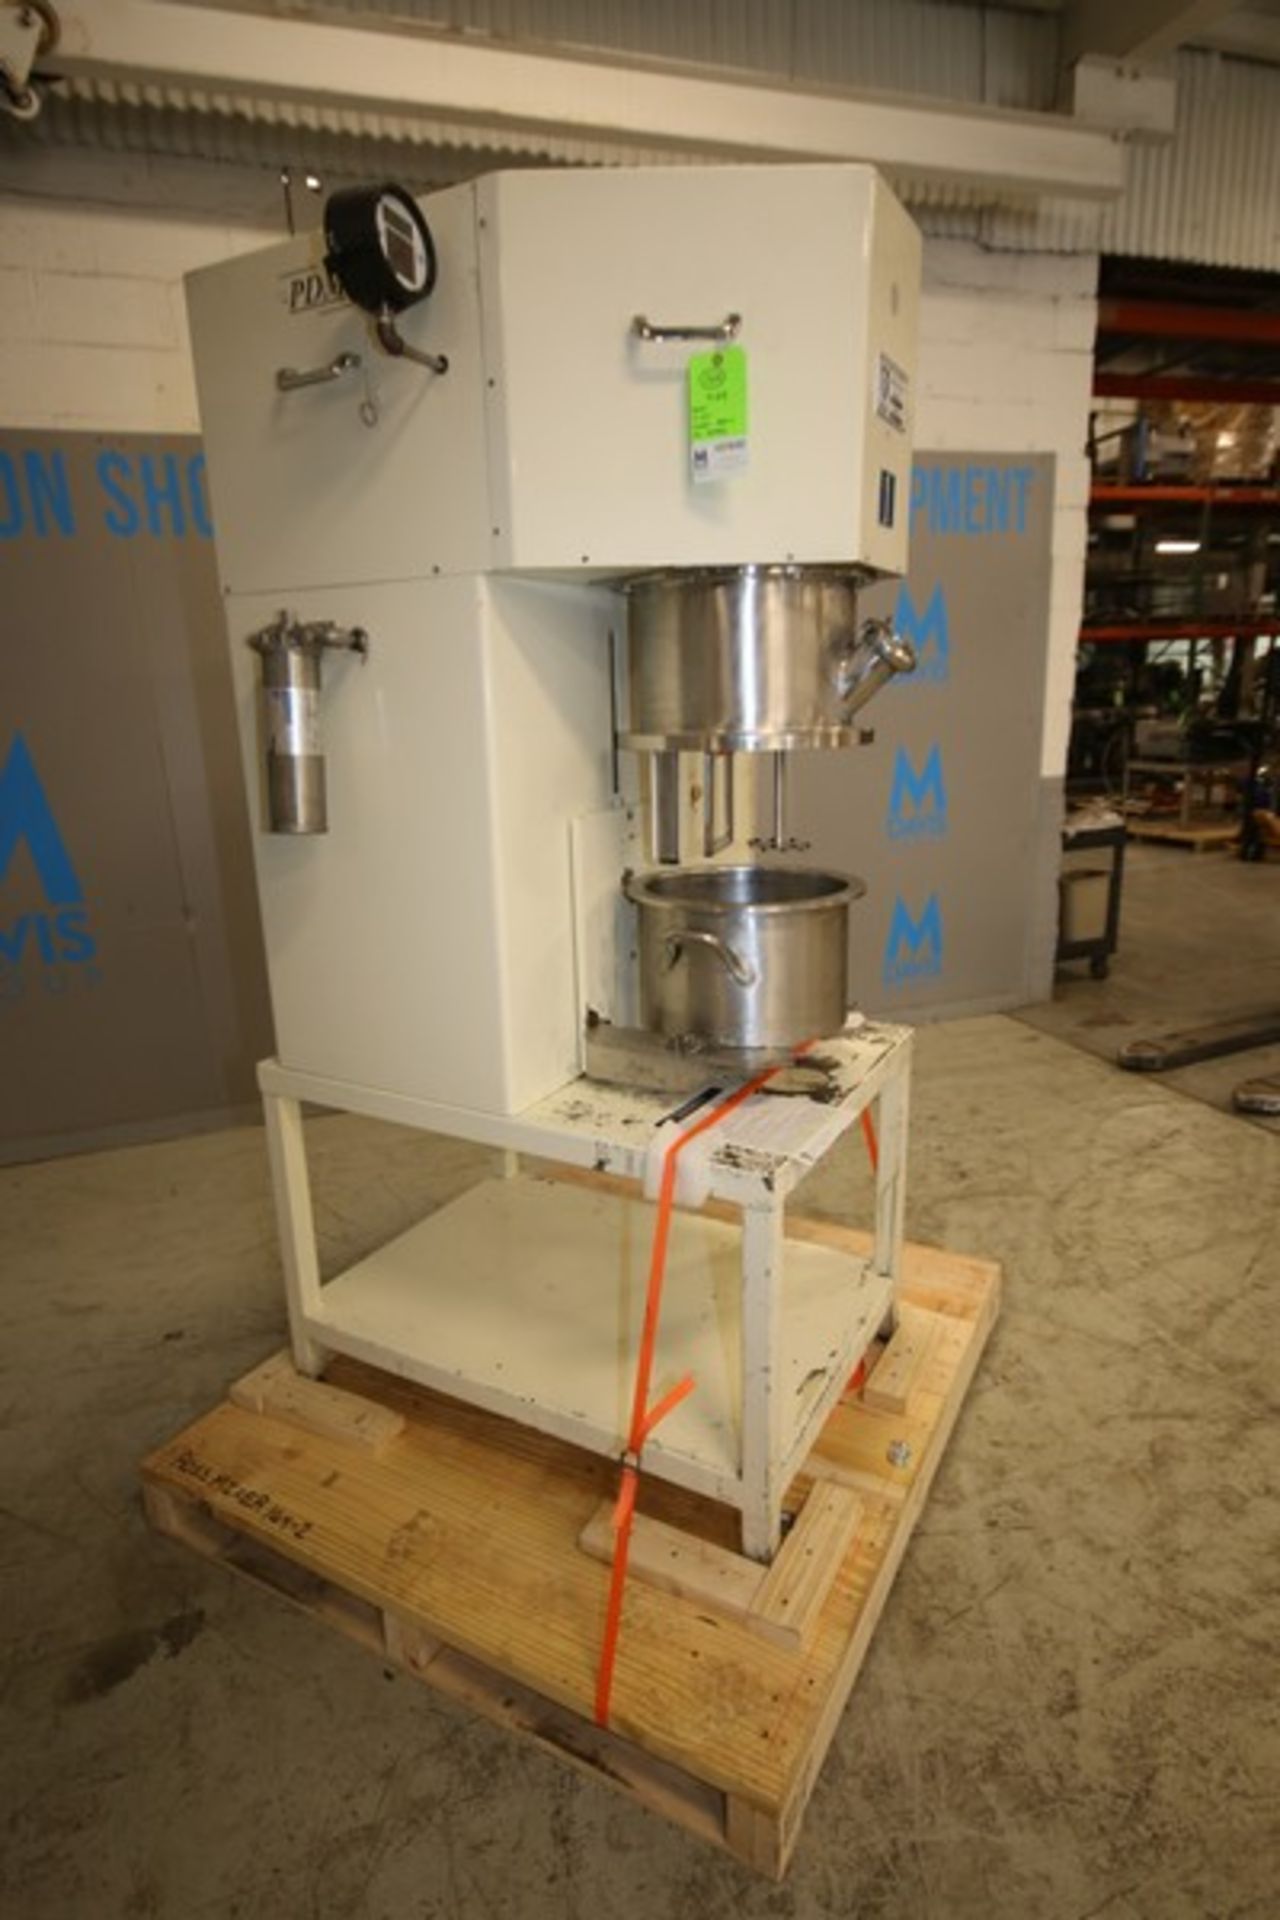 Ross Planetary Mixer, Model PDM-4, SN 104097, with Stirrer & Disperser, 14" W x 8" D S/S Mixing